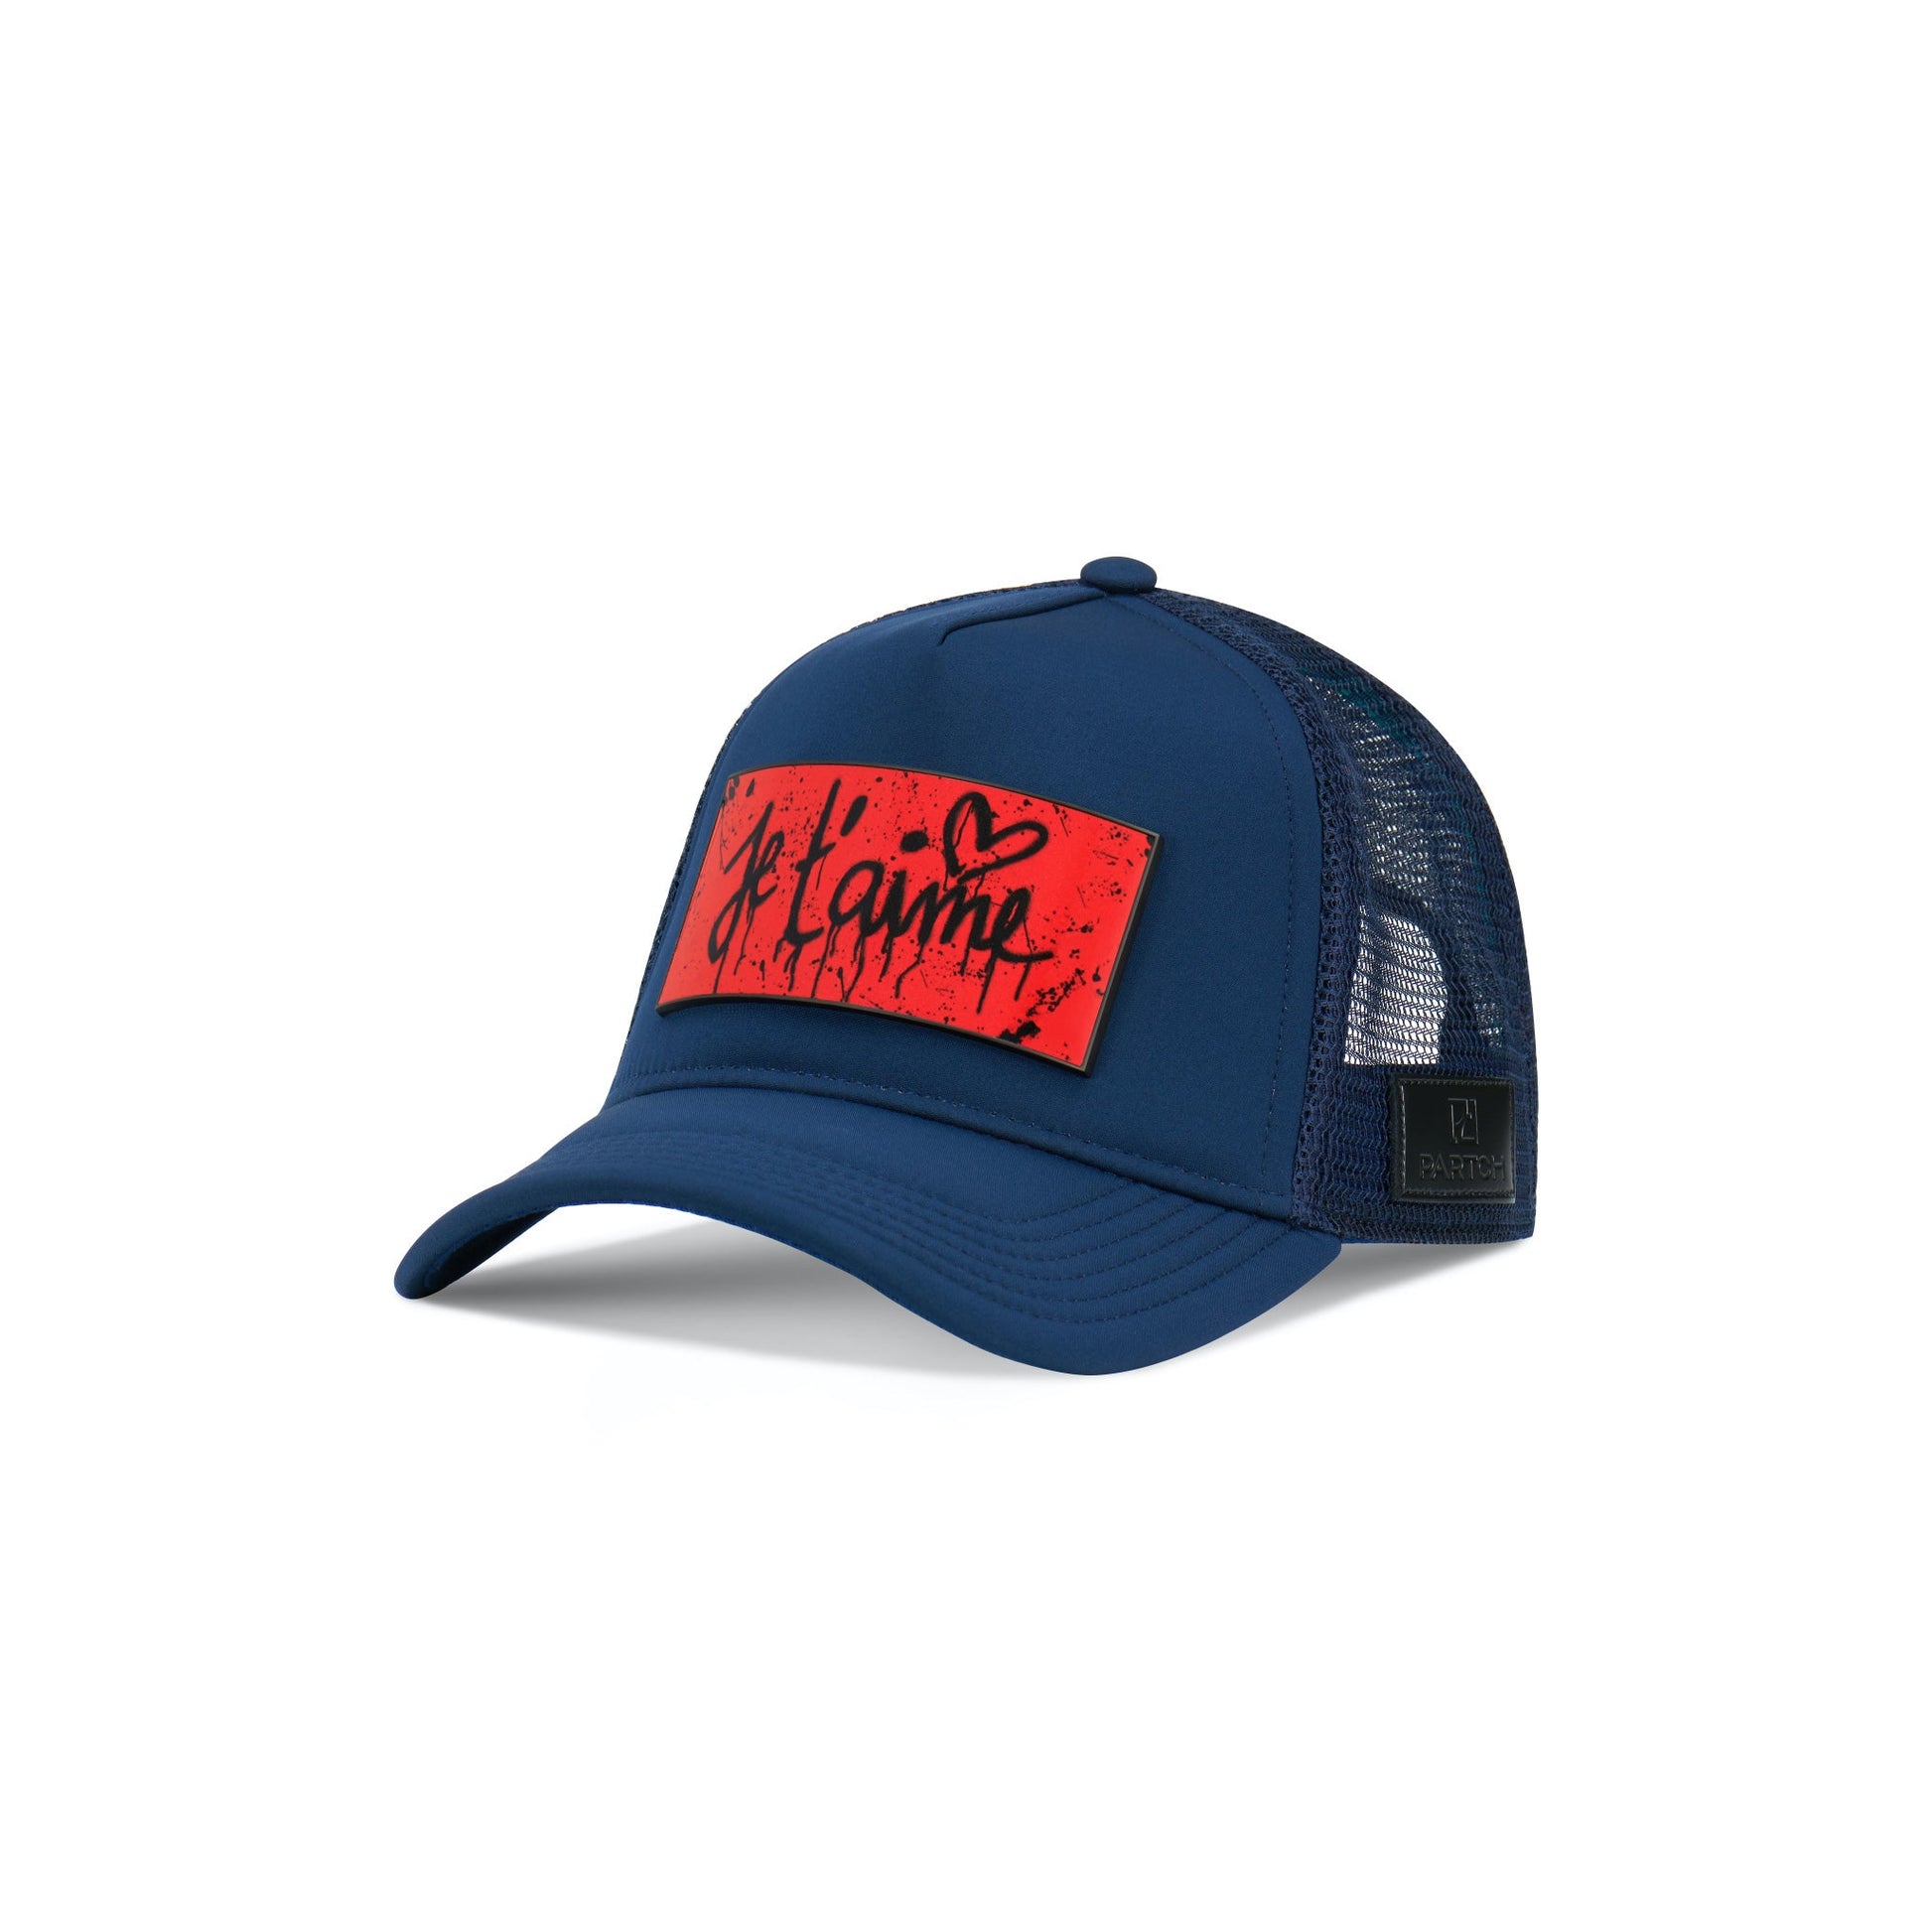 Partch Trucker Hat Navy Blue with PARTCH-Clip Je T’aime Front View